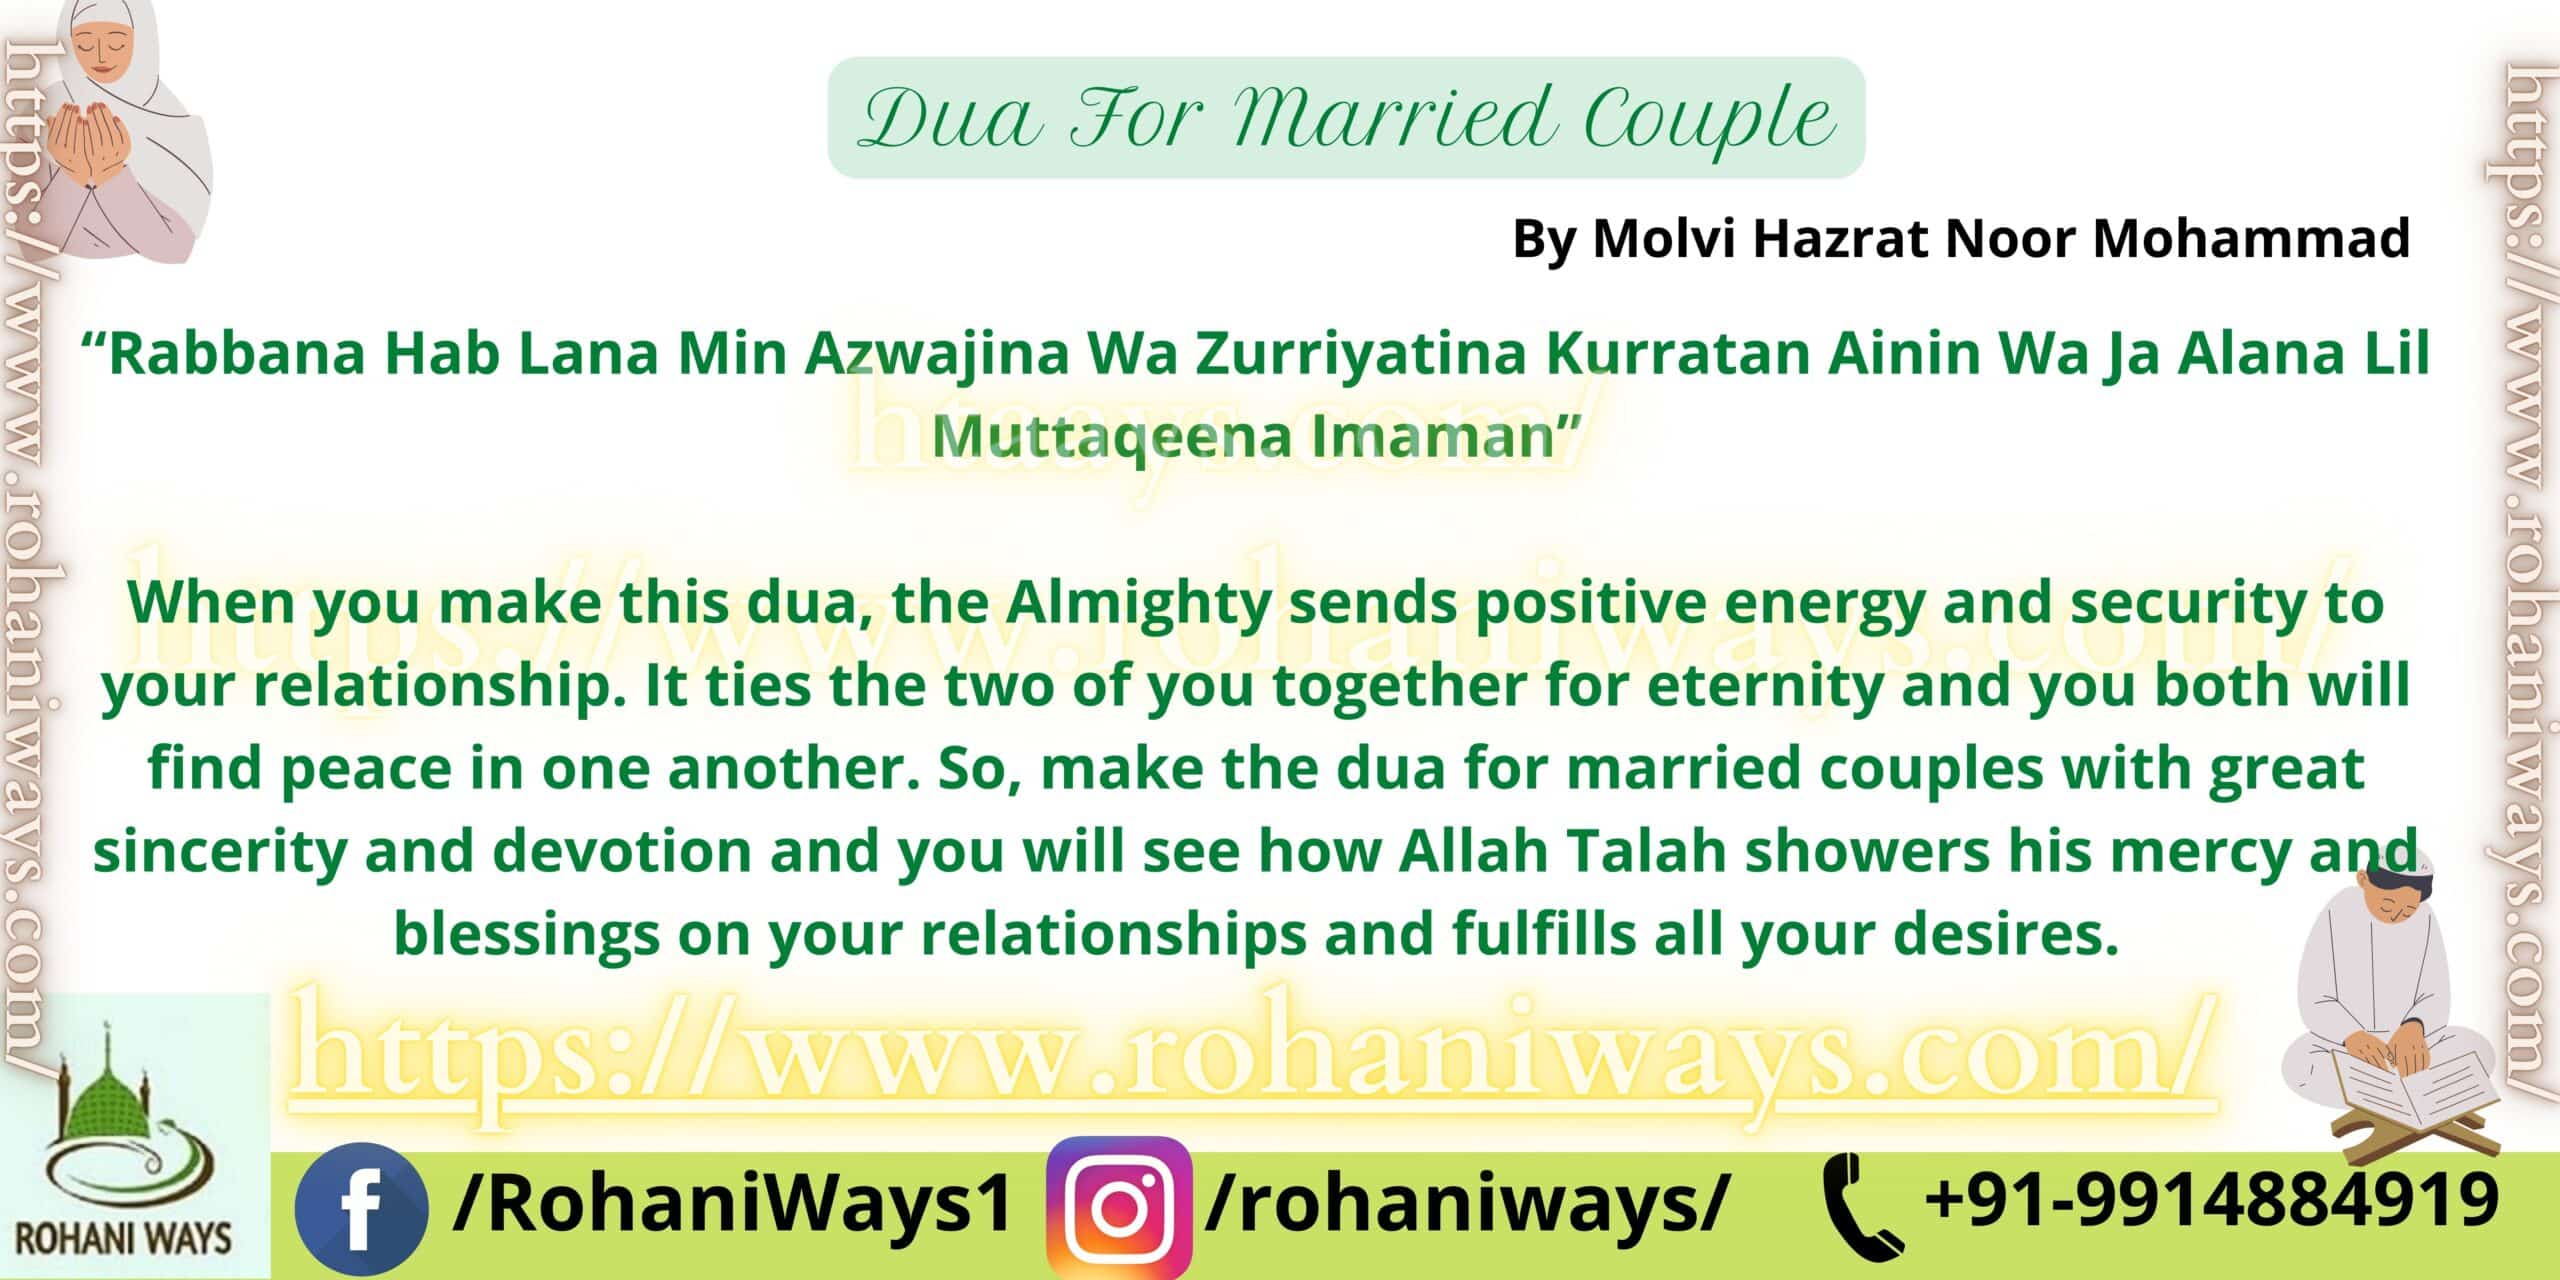 Dua For Married Couple